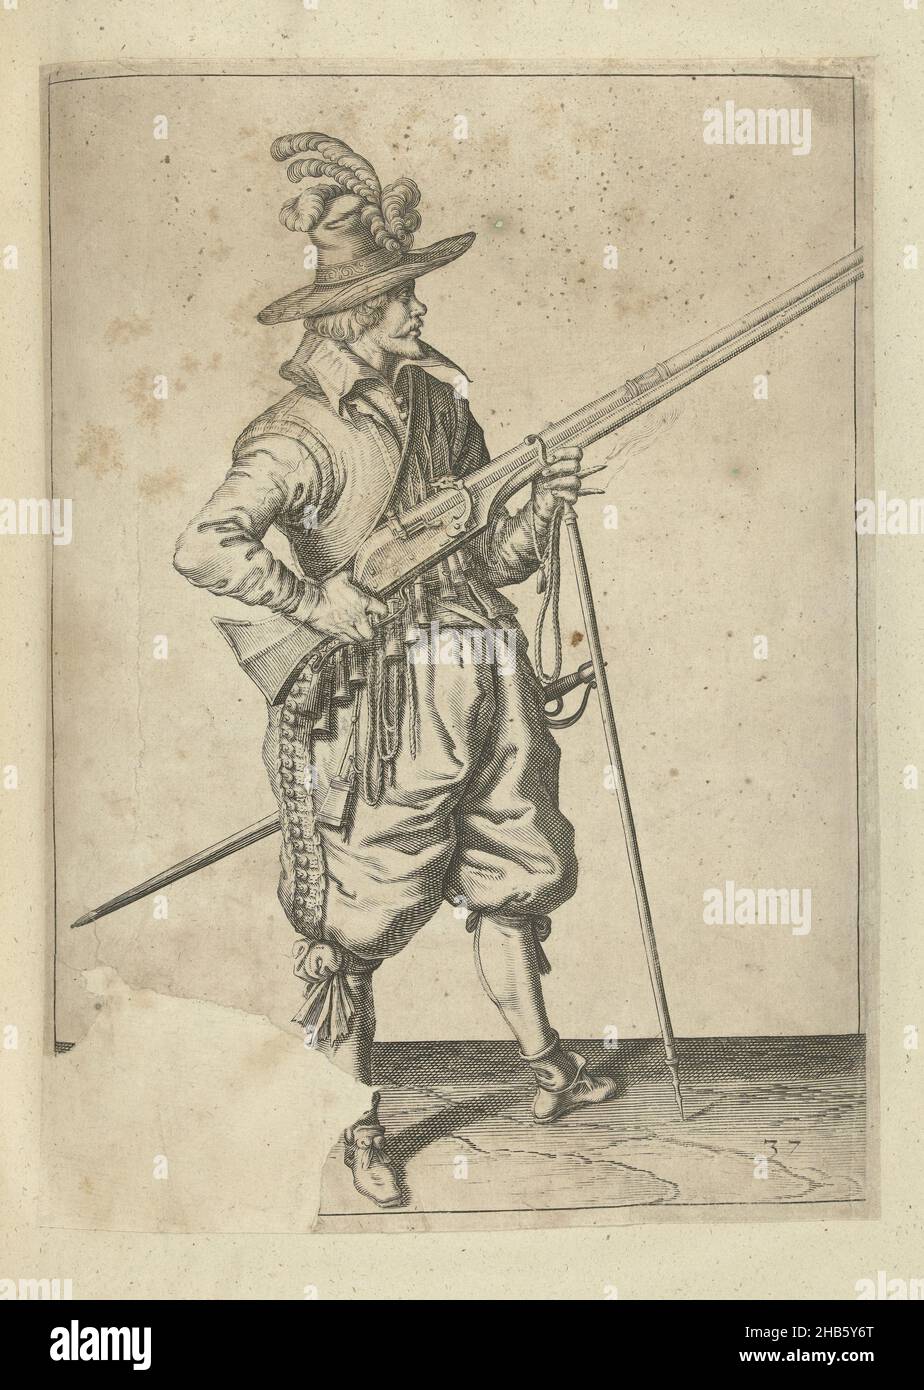 Soldier on guard holding his musket by his right side angled upward, his finger on the trigger (no. 37), ca. 1600, A soldier on guard, full-length, to the right, holding a musket (a particular type of firearm) by his right side, his right index finger on the trigger, his left hand around the fork of the furket (musket fork) on which the barrel rests, angled upward (no. 37), ca. 1600. In his left hand also a burning fuse. Plate 37 in the instructions for handling the musket: Shortest instruction for the figures, so much concerneth the right use of muskett. Part of the illustrations in an Stock Photo